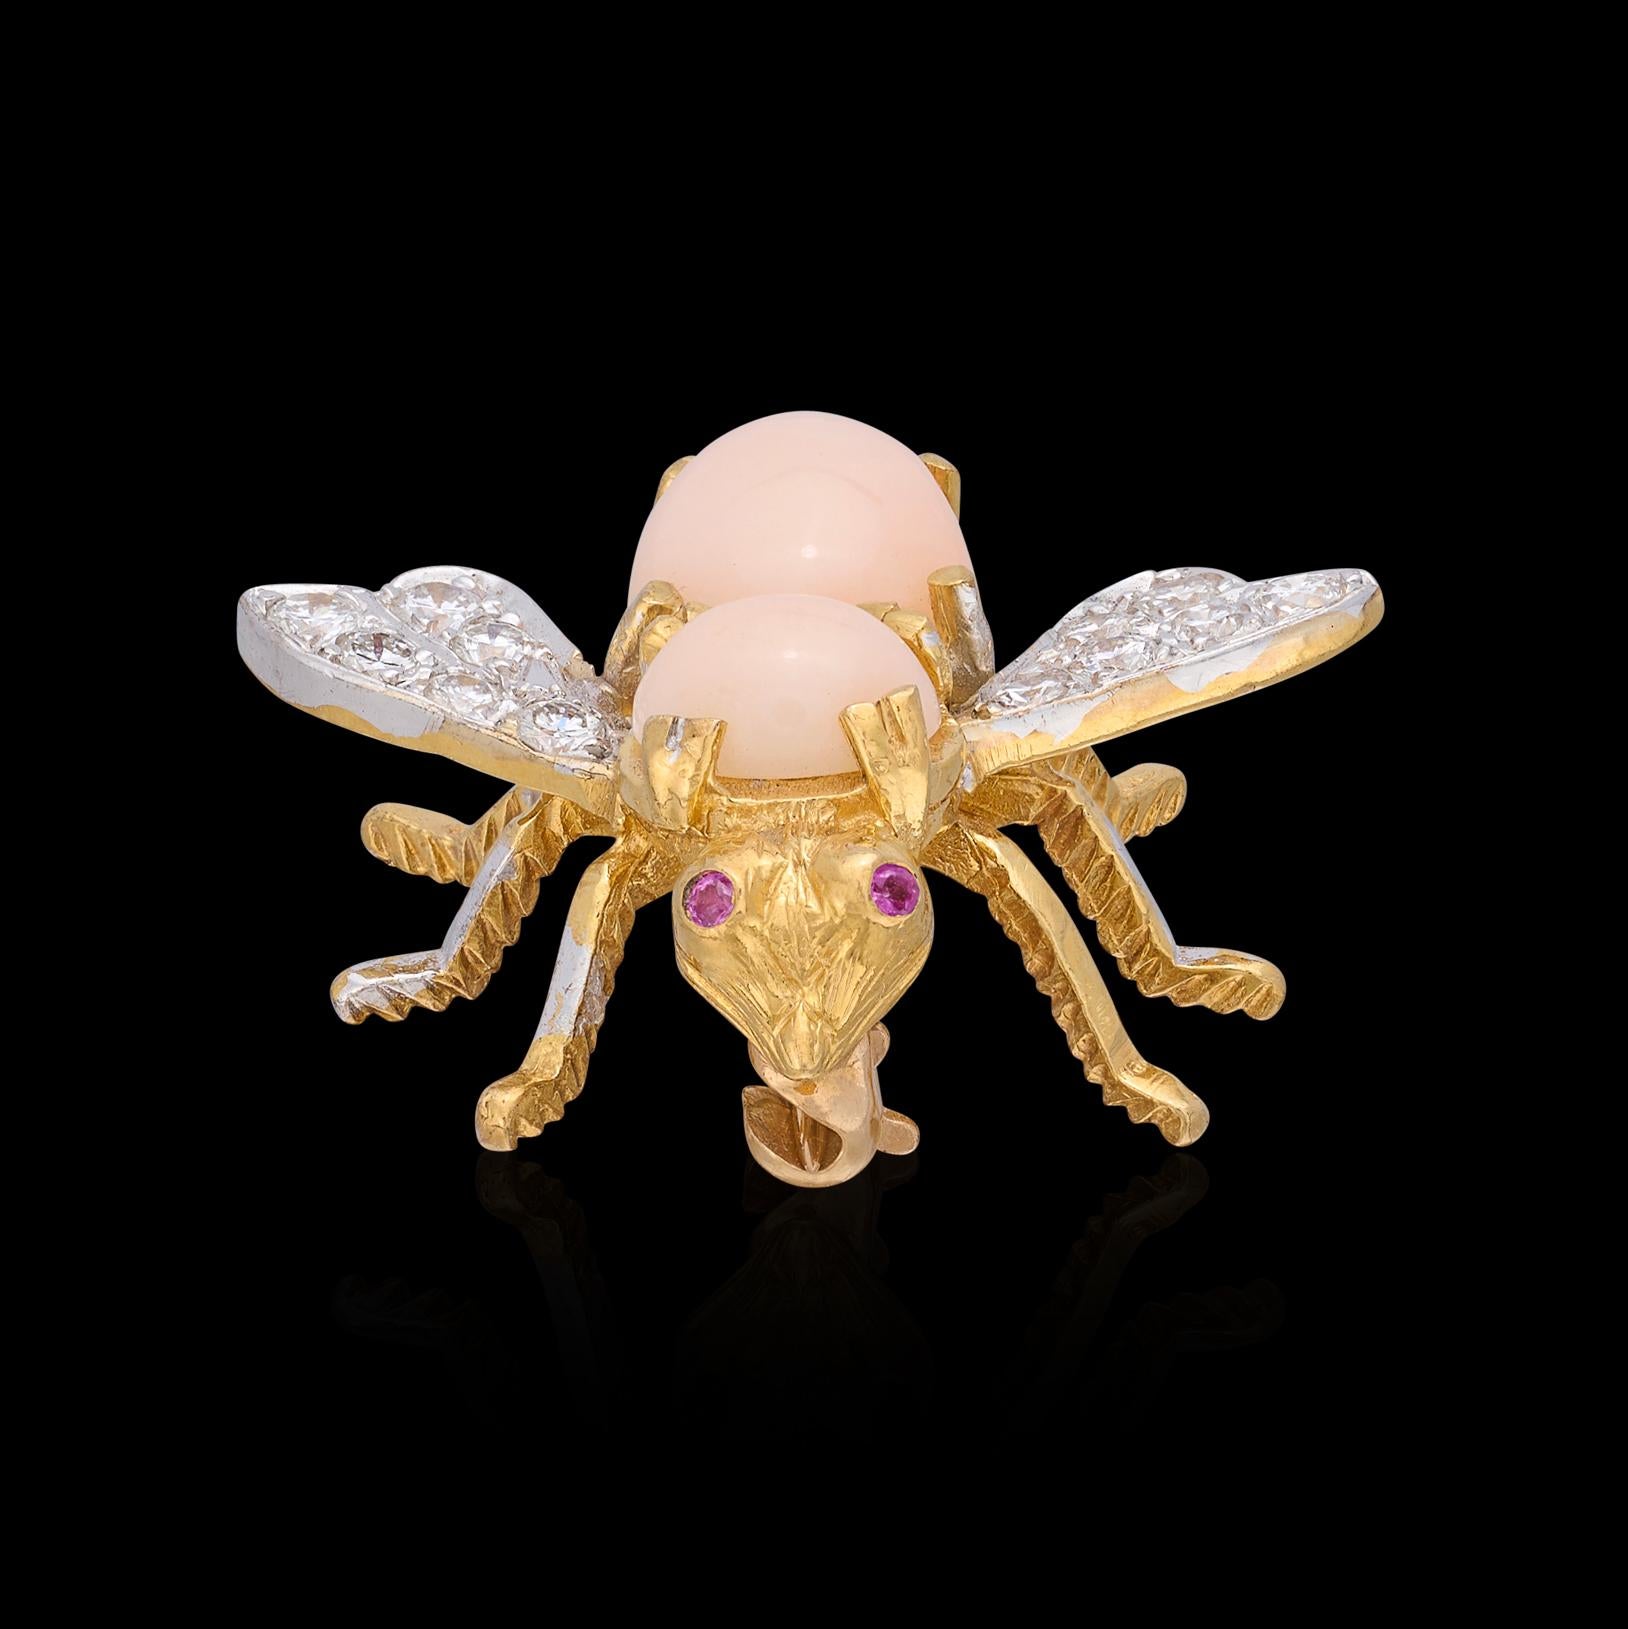 This 18k gold bee brooch, by Rosenthal - one of the best of the 1970's  - is a hard-to-find coral example. Designed with angel skin coral body, wings set with 12 round brilliant-cut diamonds, G-H/VS, weighing an estimated 0.40-cts, and accented with